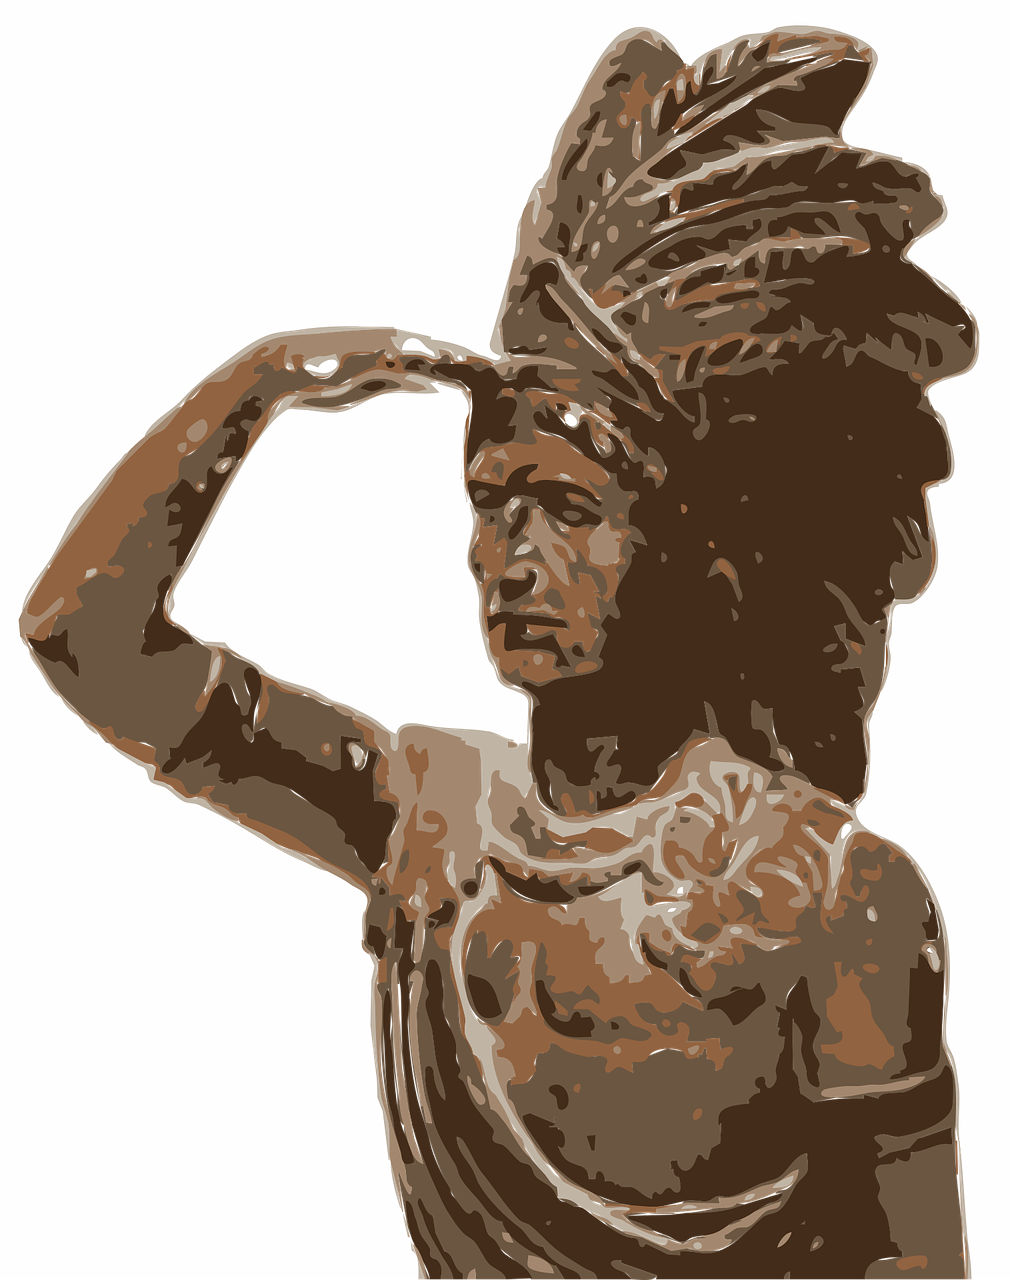 a statue of a woman with a feather on her head, a statue, saluting, brown armor, vectorised, indigenous man